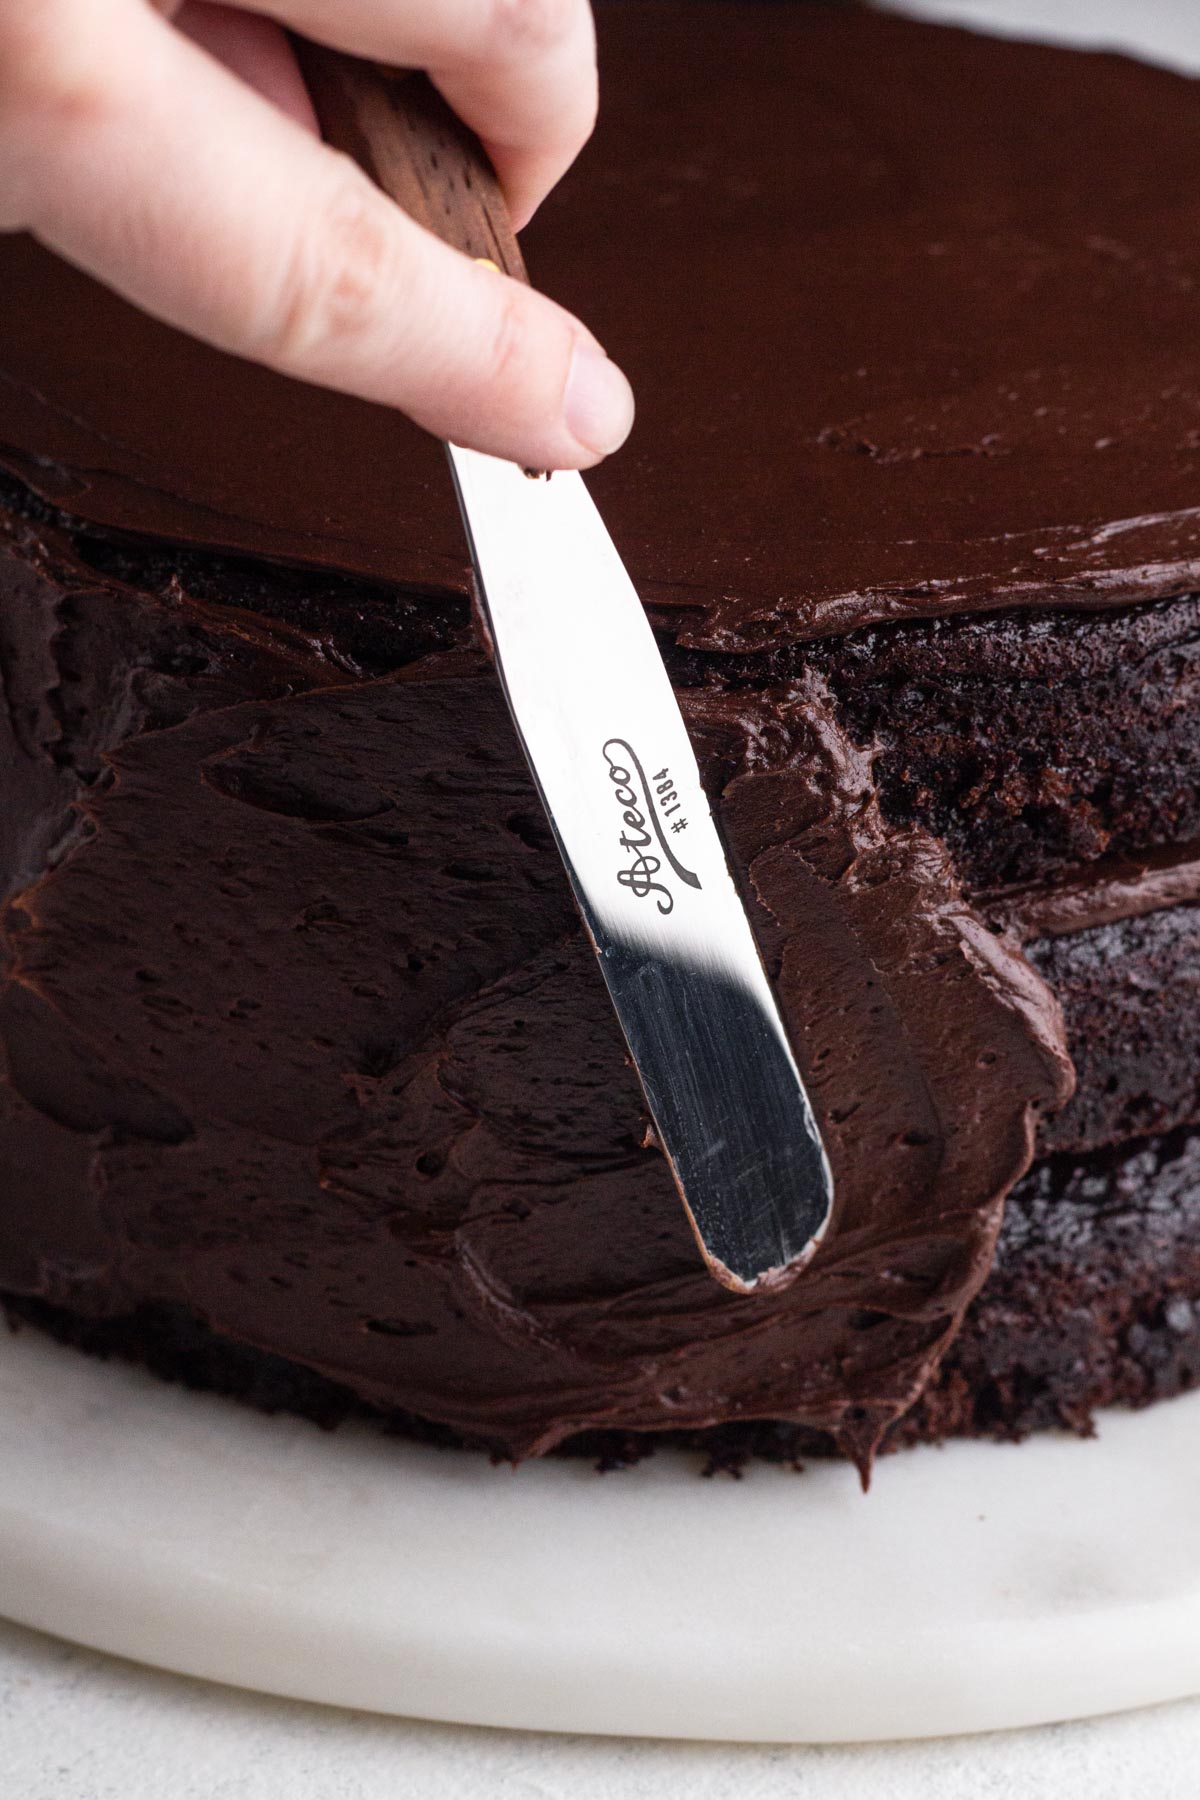 Spatula spreading chocolate frosting onto the side of a three layer chocolate cake.